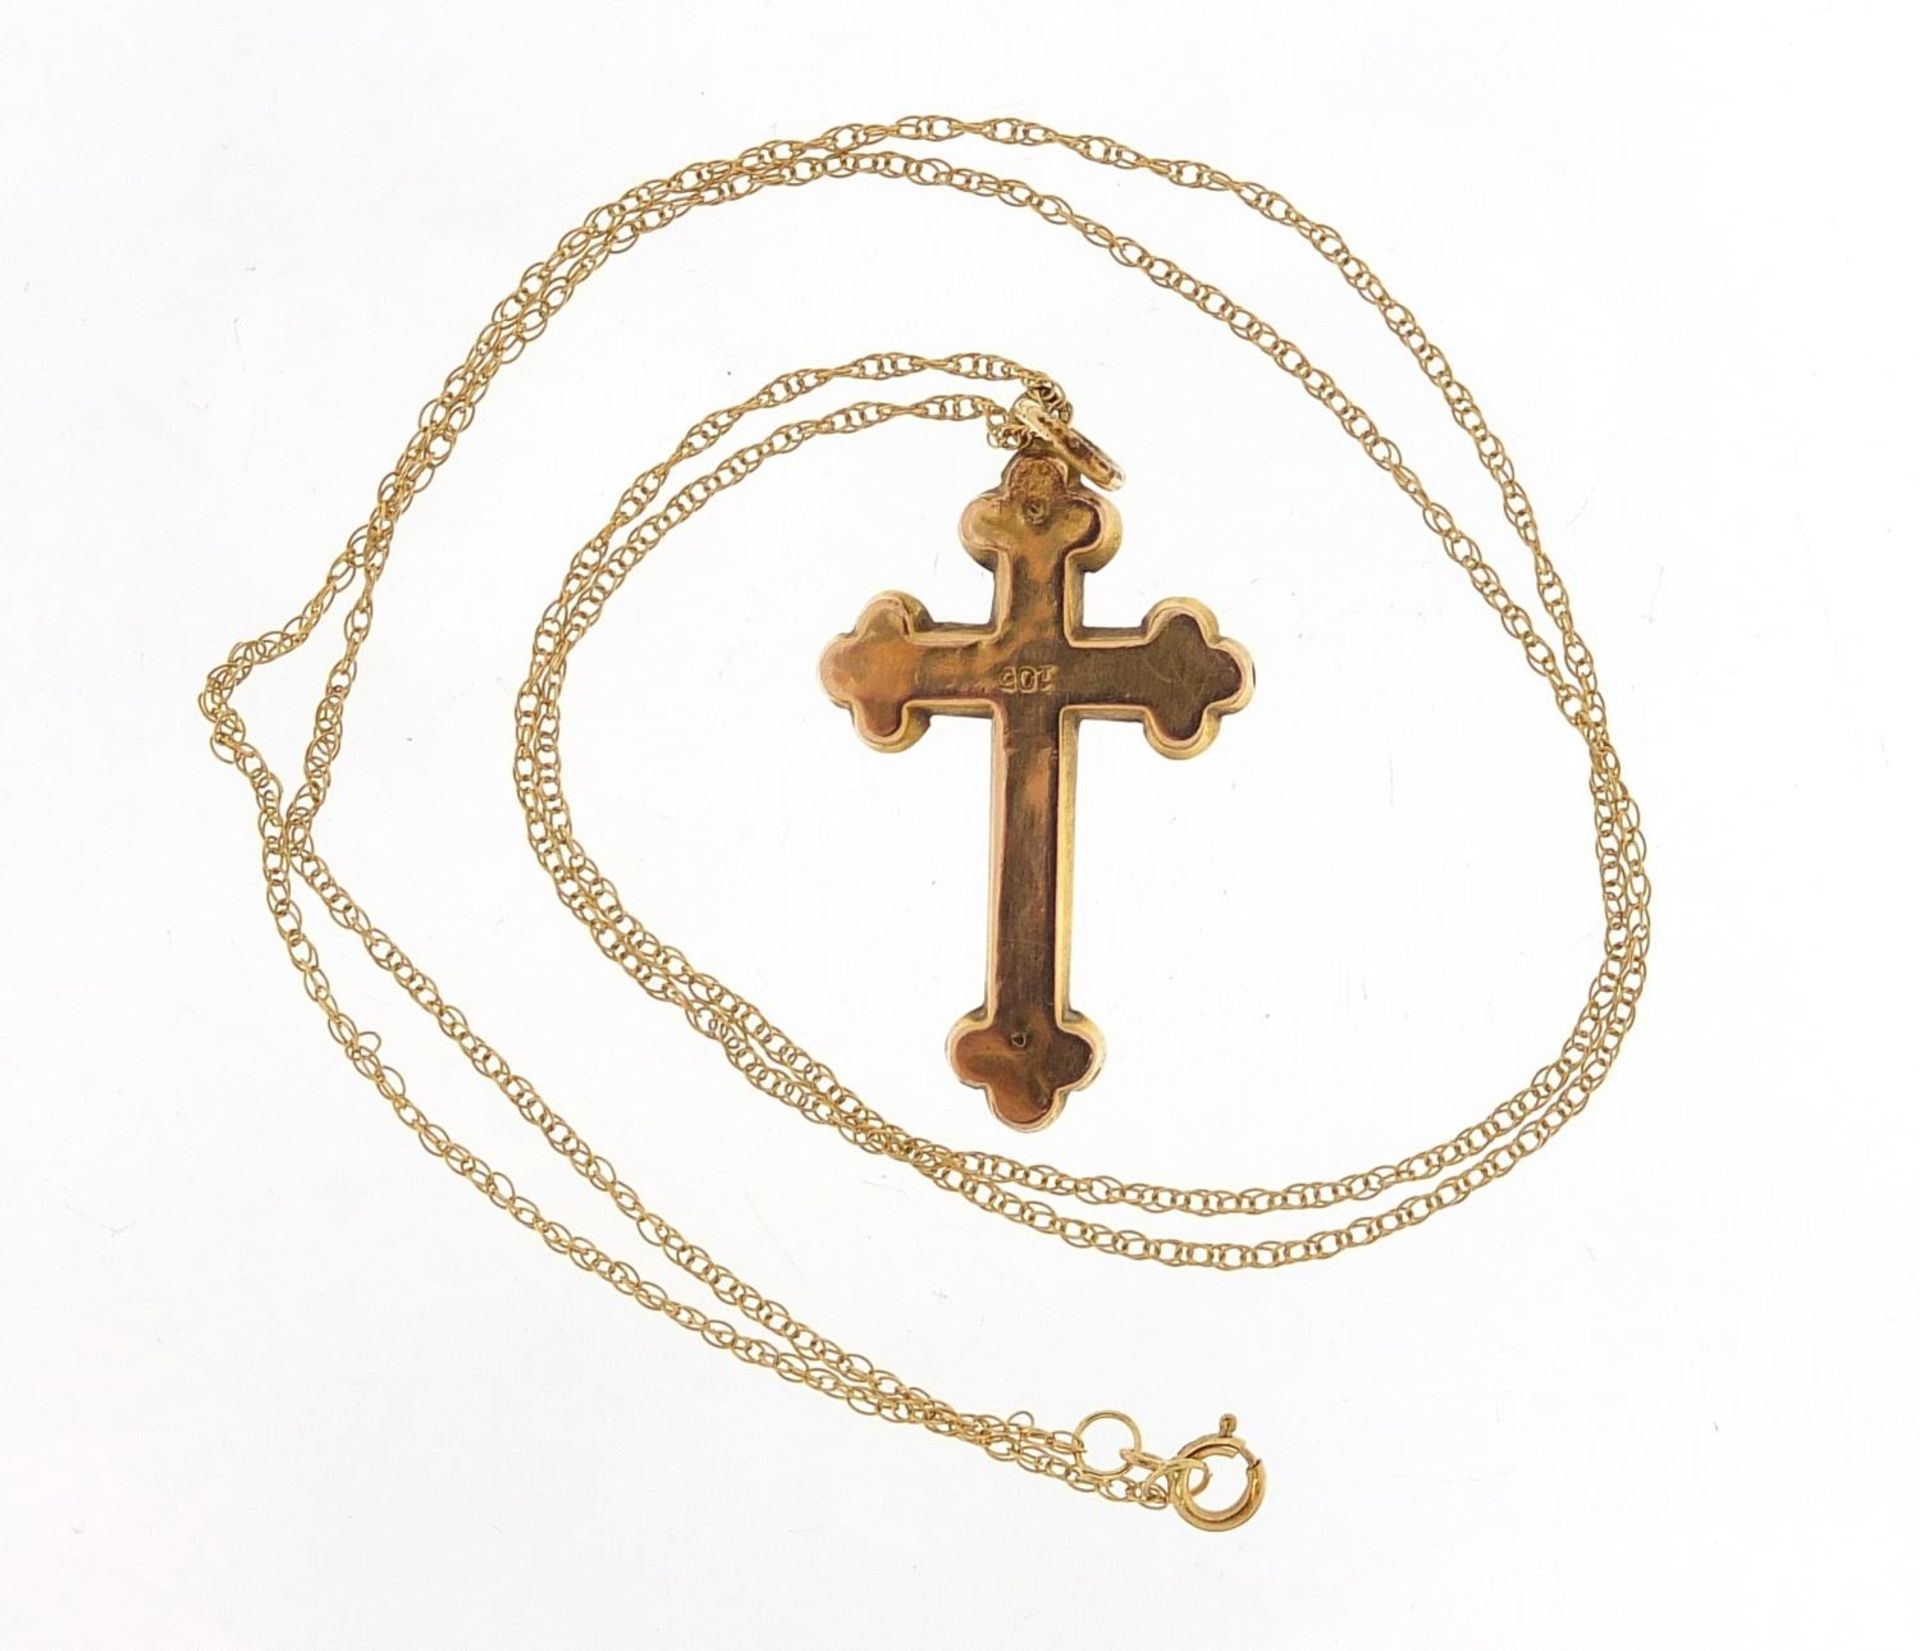 9ct gold engraved cross pendant on a 9ct gold necklace, 3.3cm high and 47cm in length, 1.4g - Image 3 of 4